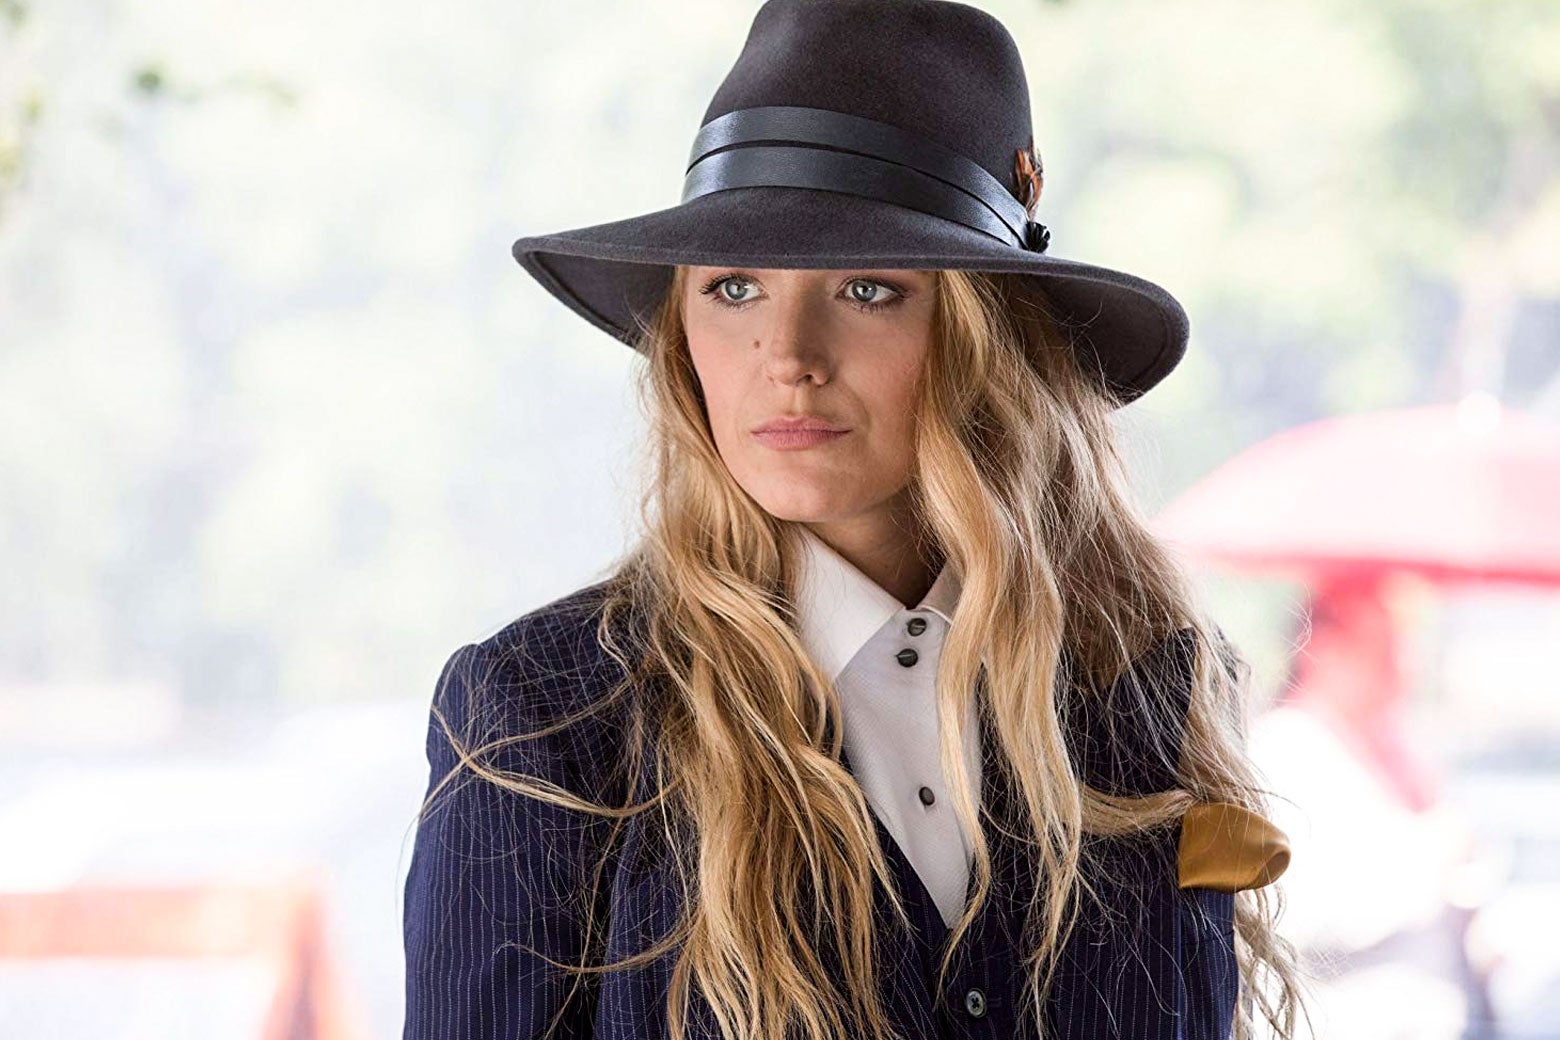 Blake Lively takes the plunge ahead of promoting A Simple Favor